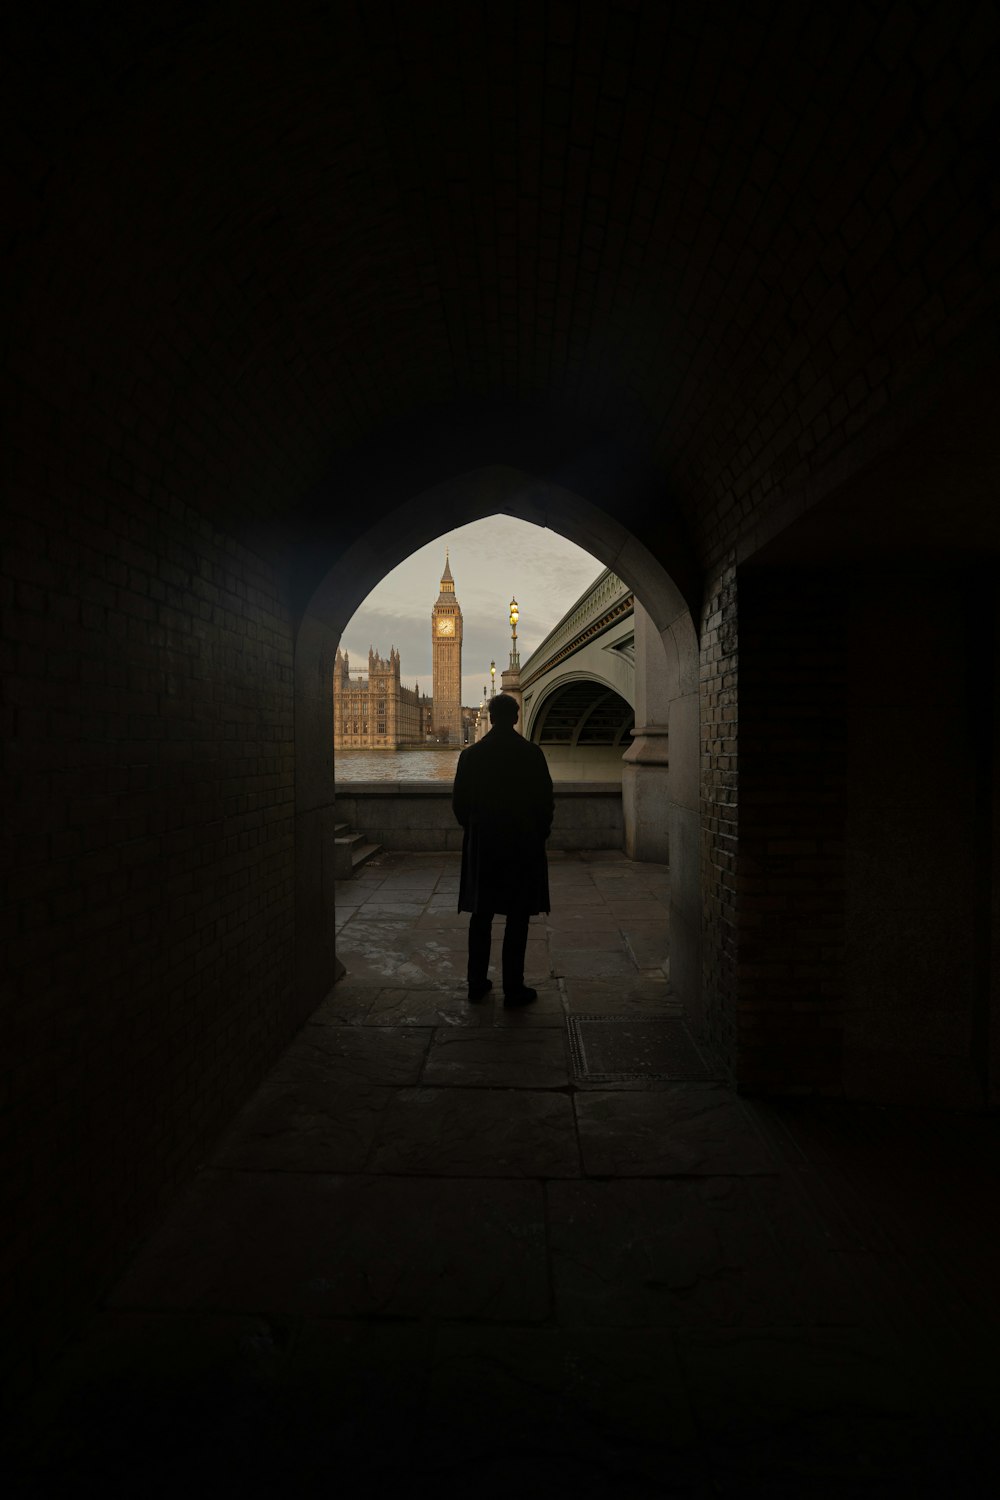 a man standing in a tunnel with a clock tower in the background